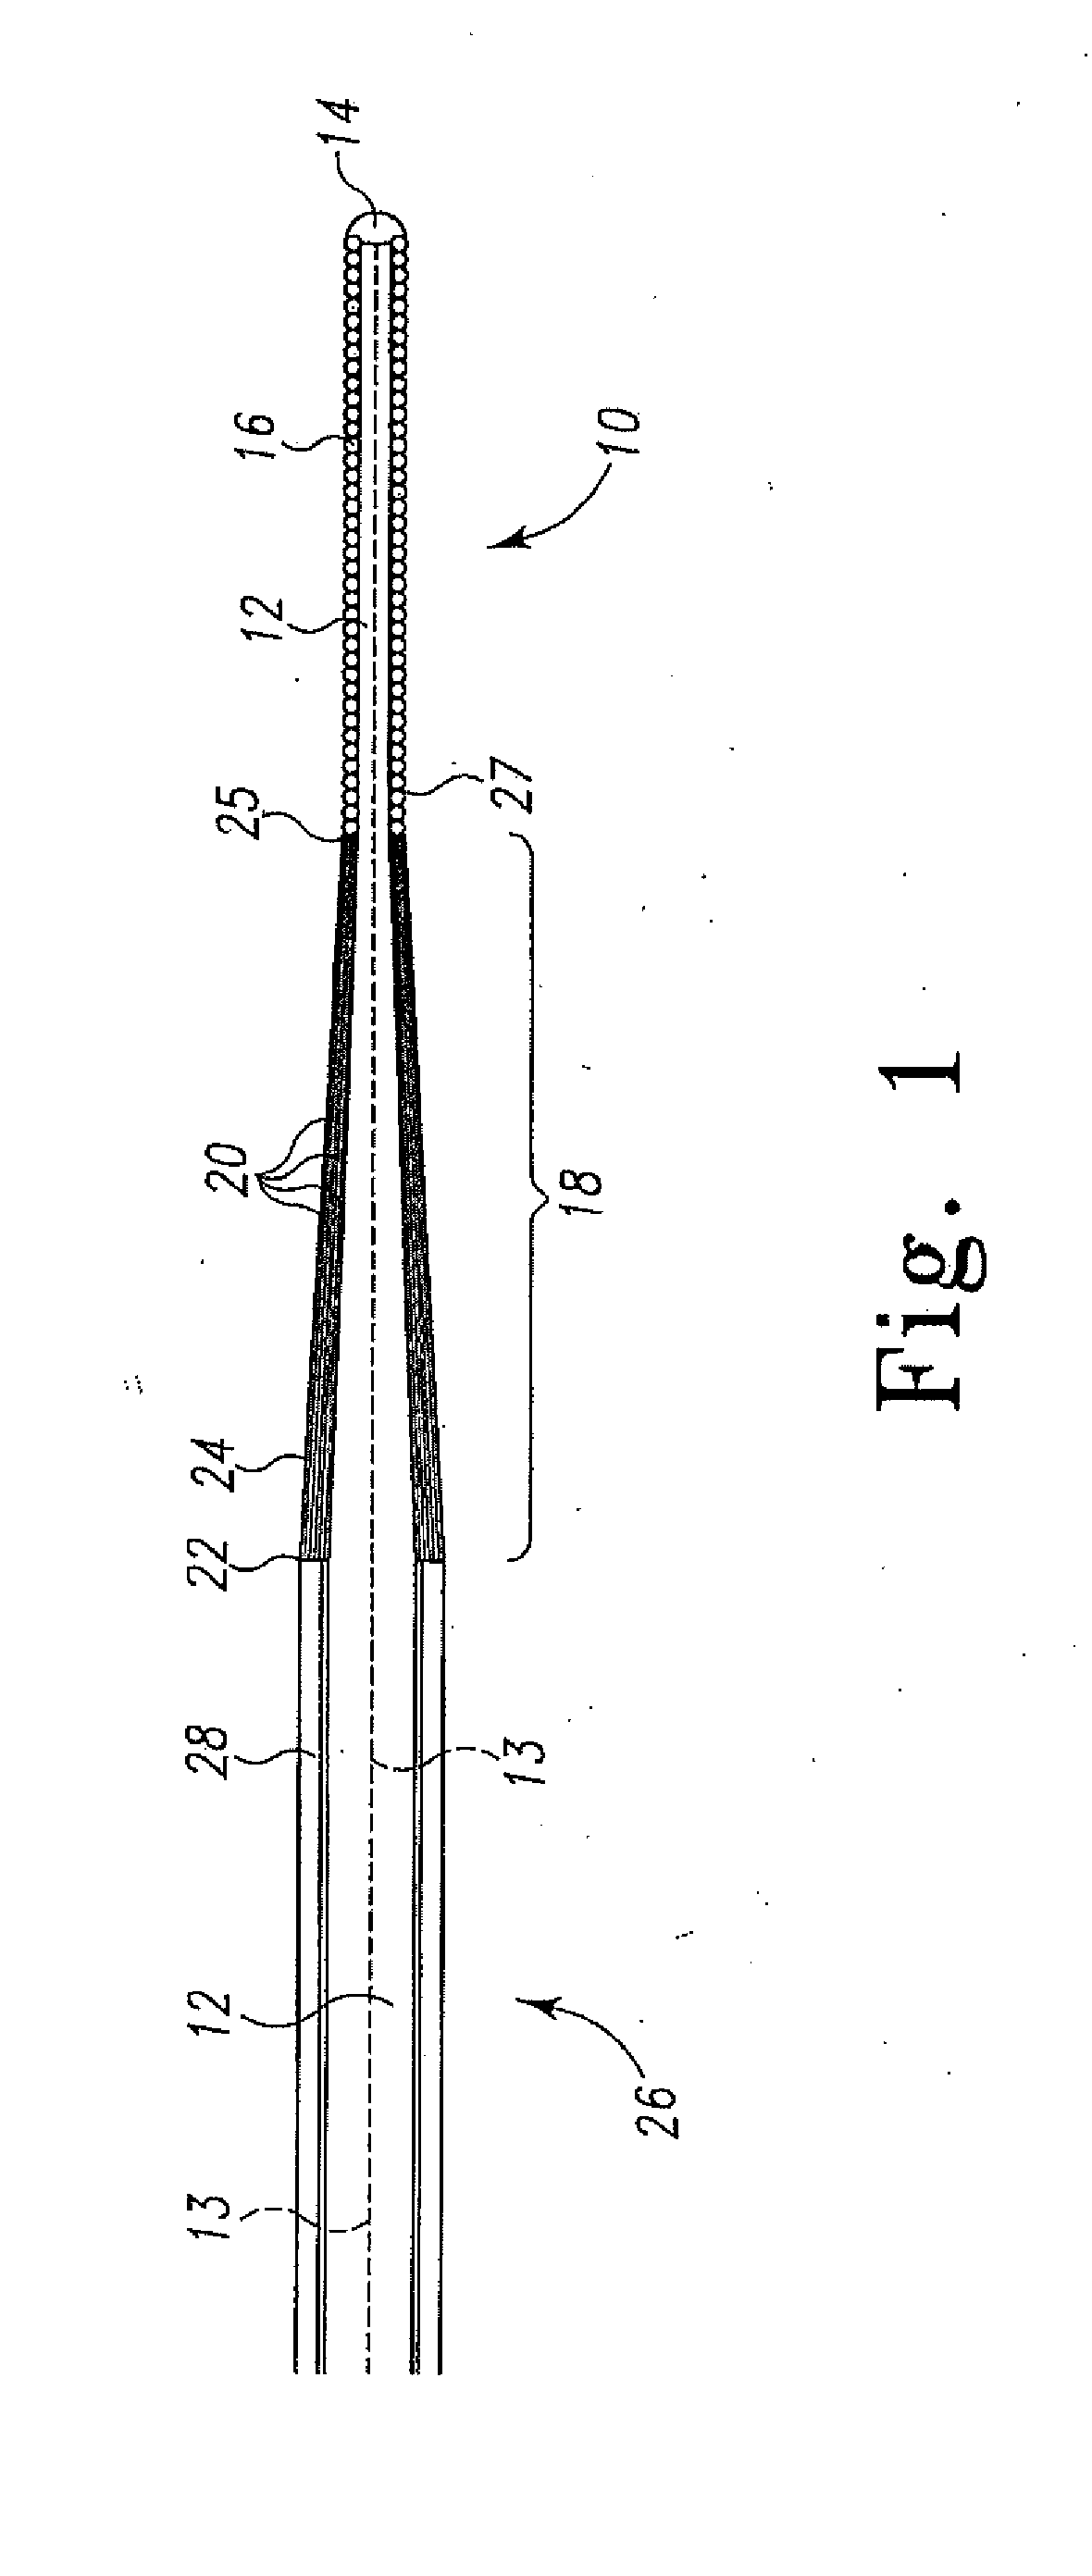 Methods and devices for delivering drugs using drug-delivery or drug-coated guidewires